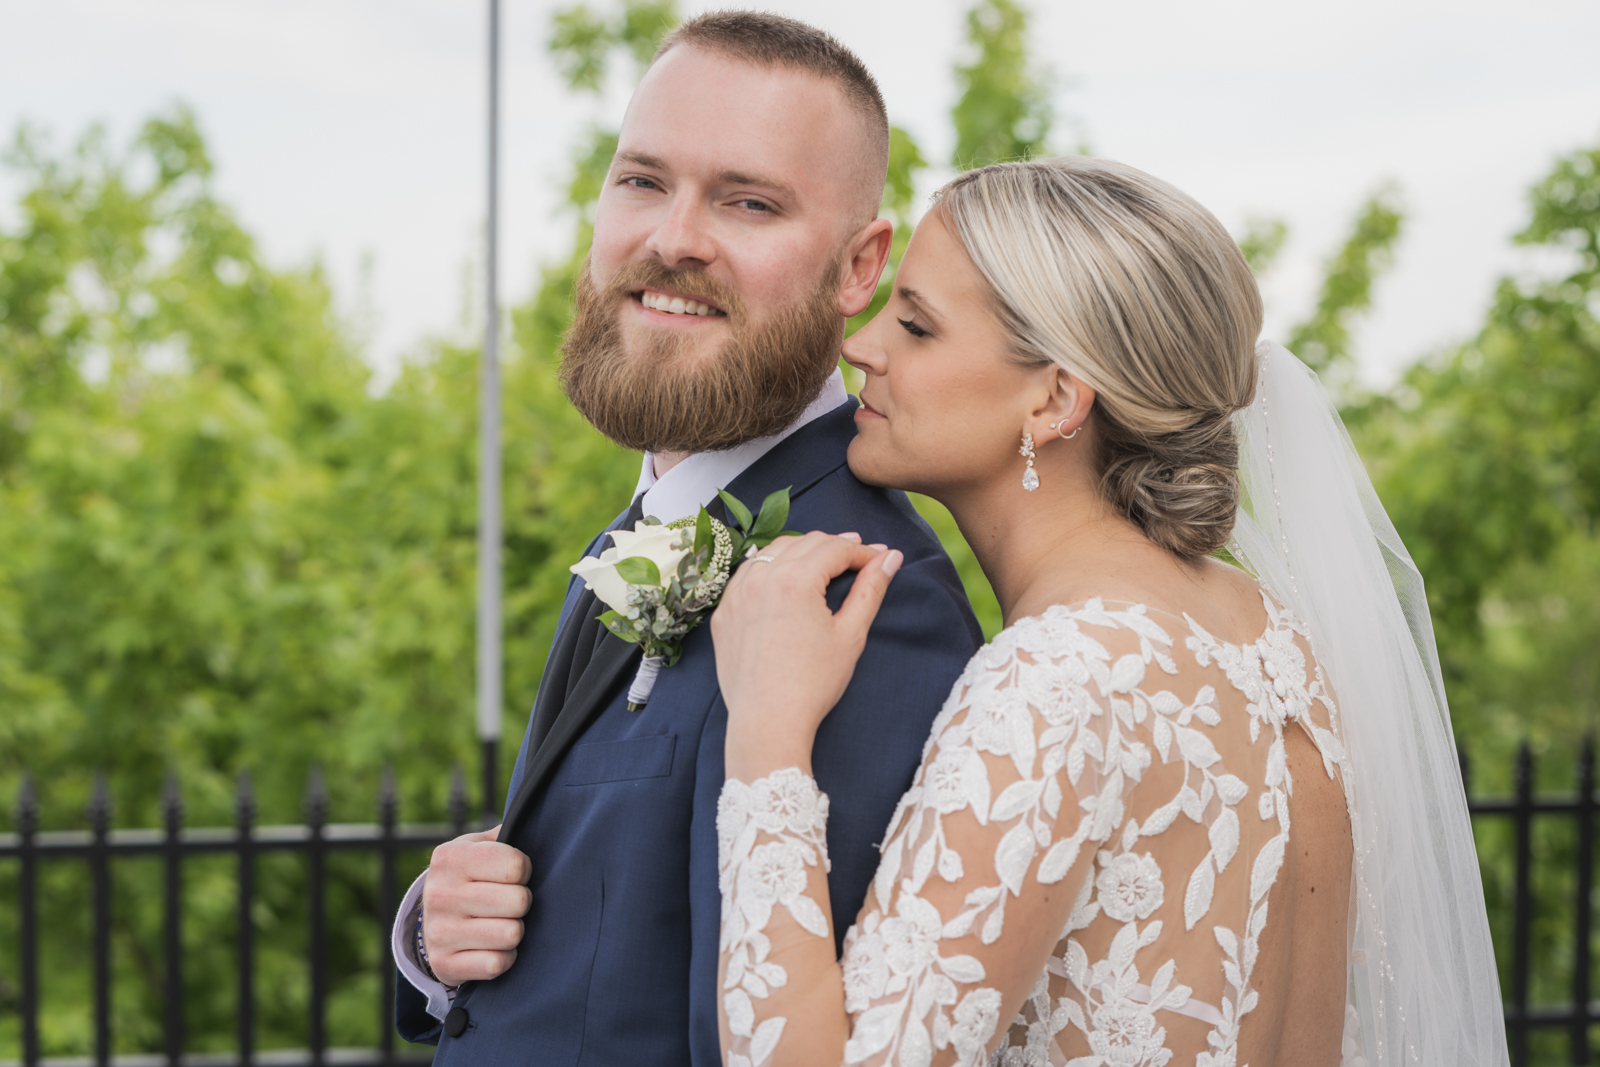 A Tale of Love and Celebration: Lauren and Brandon’s Unforgettable Wedding